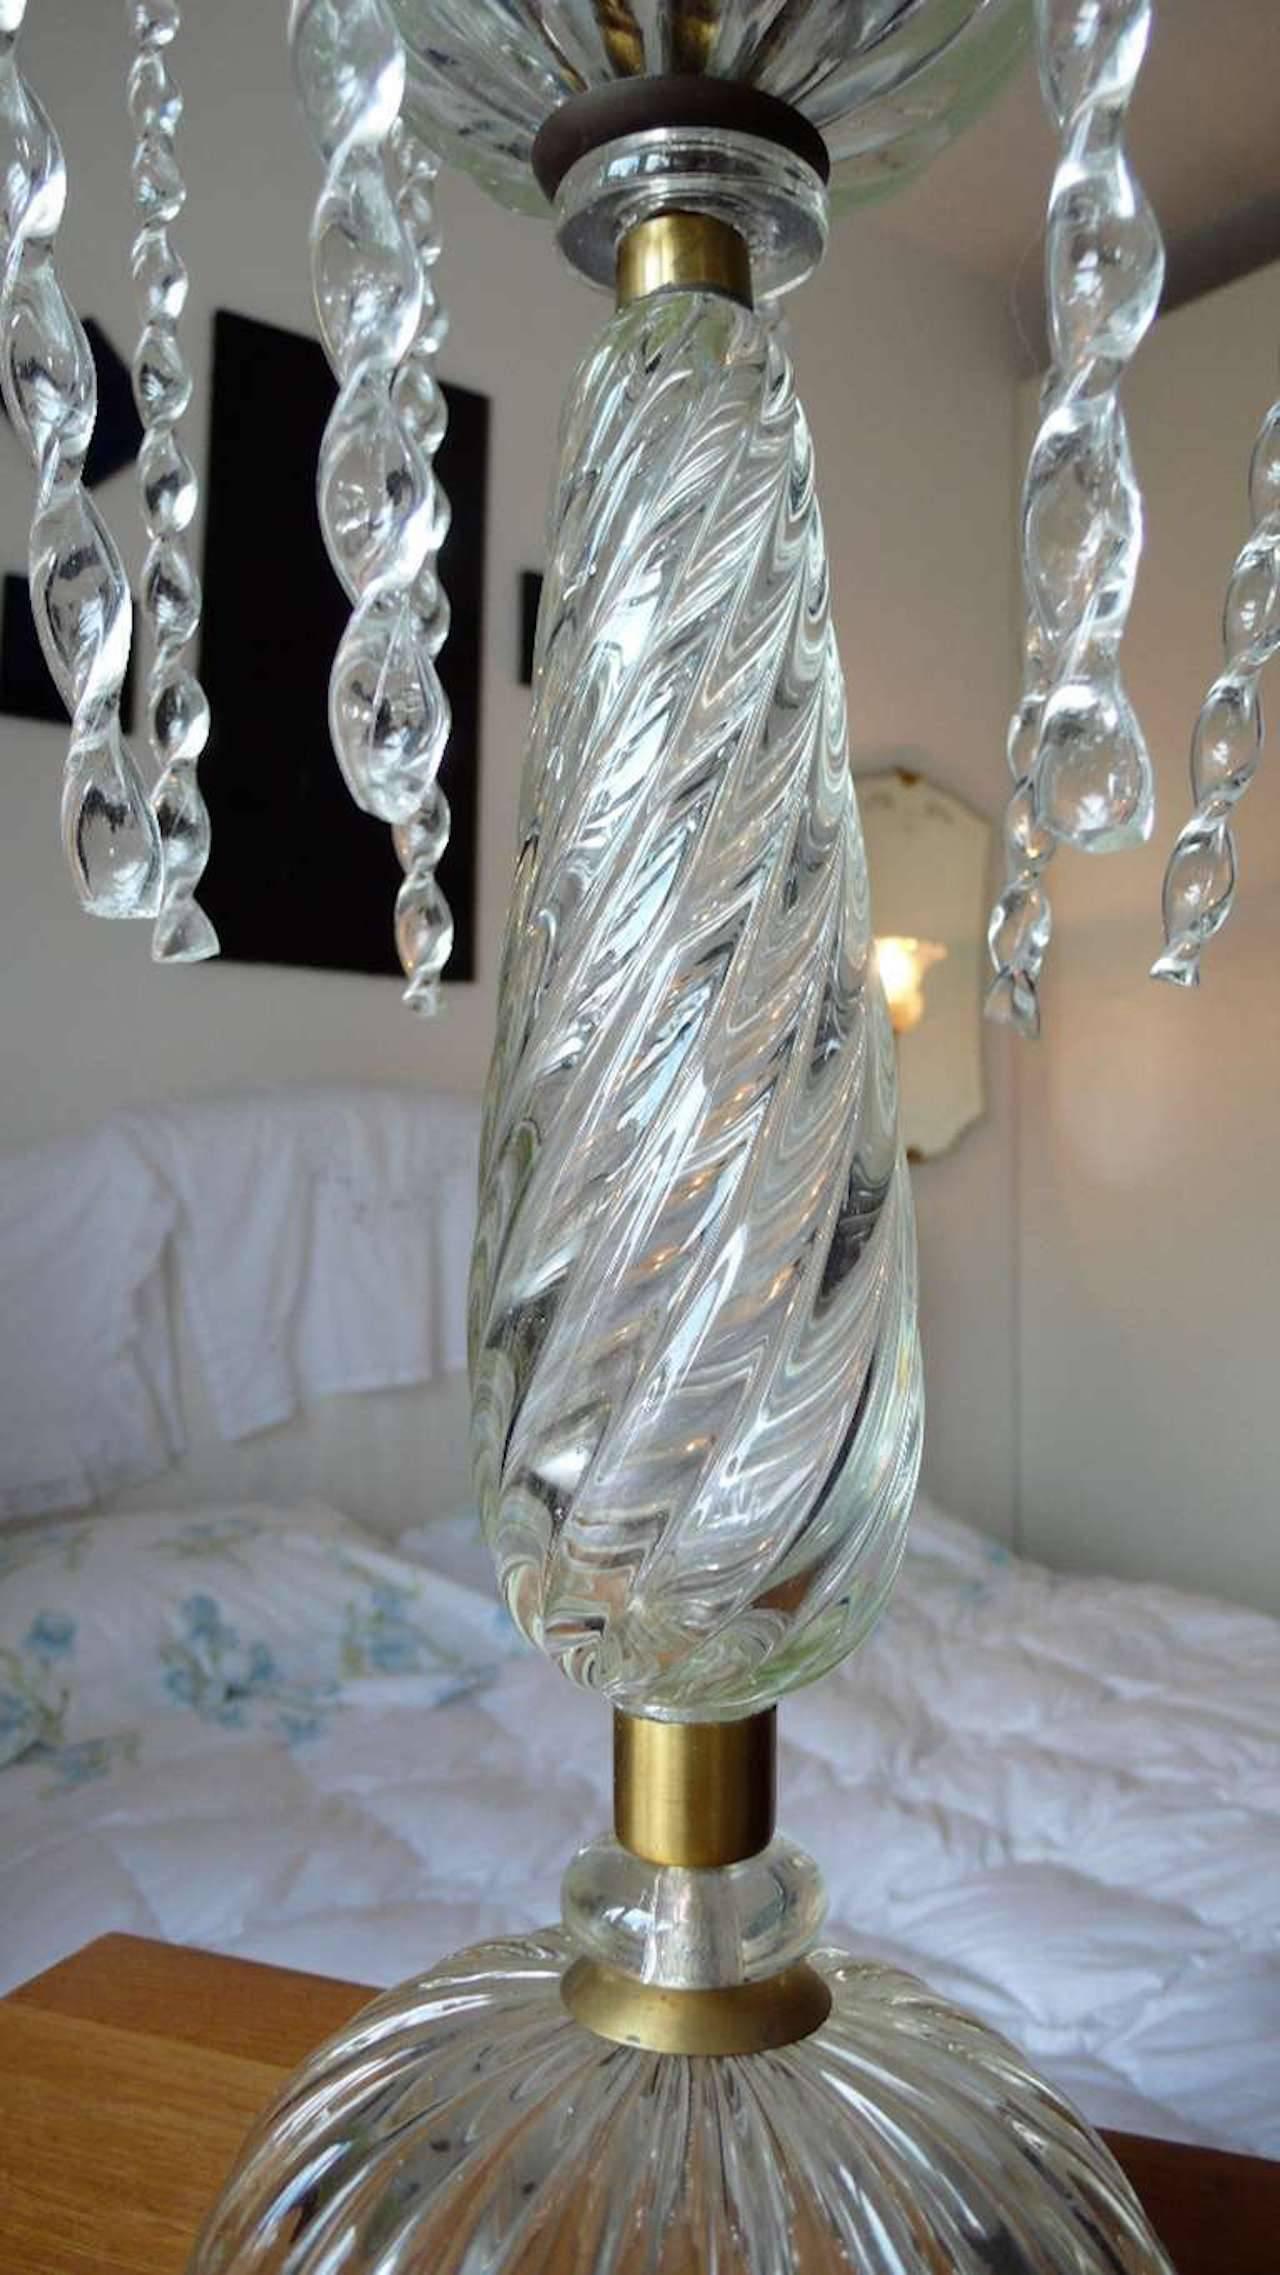 Marvellous Murano glass table lamp by Ercole Barovier, circa 1940.
From Private Von Plant collection.
 